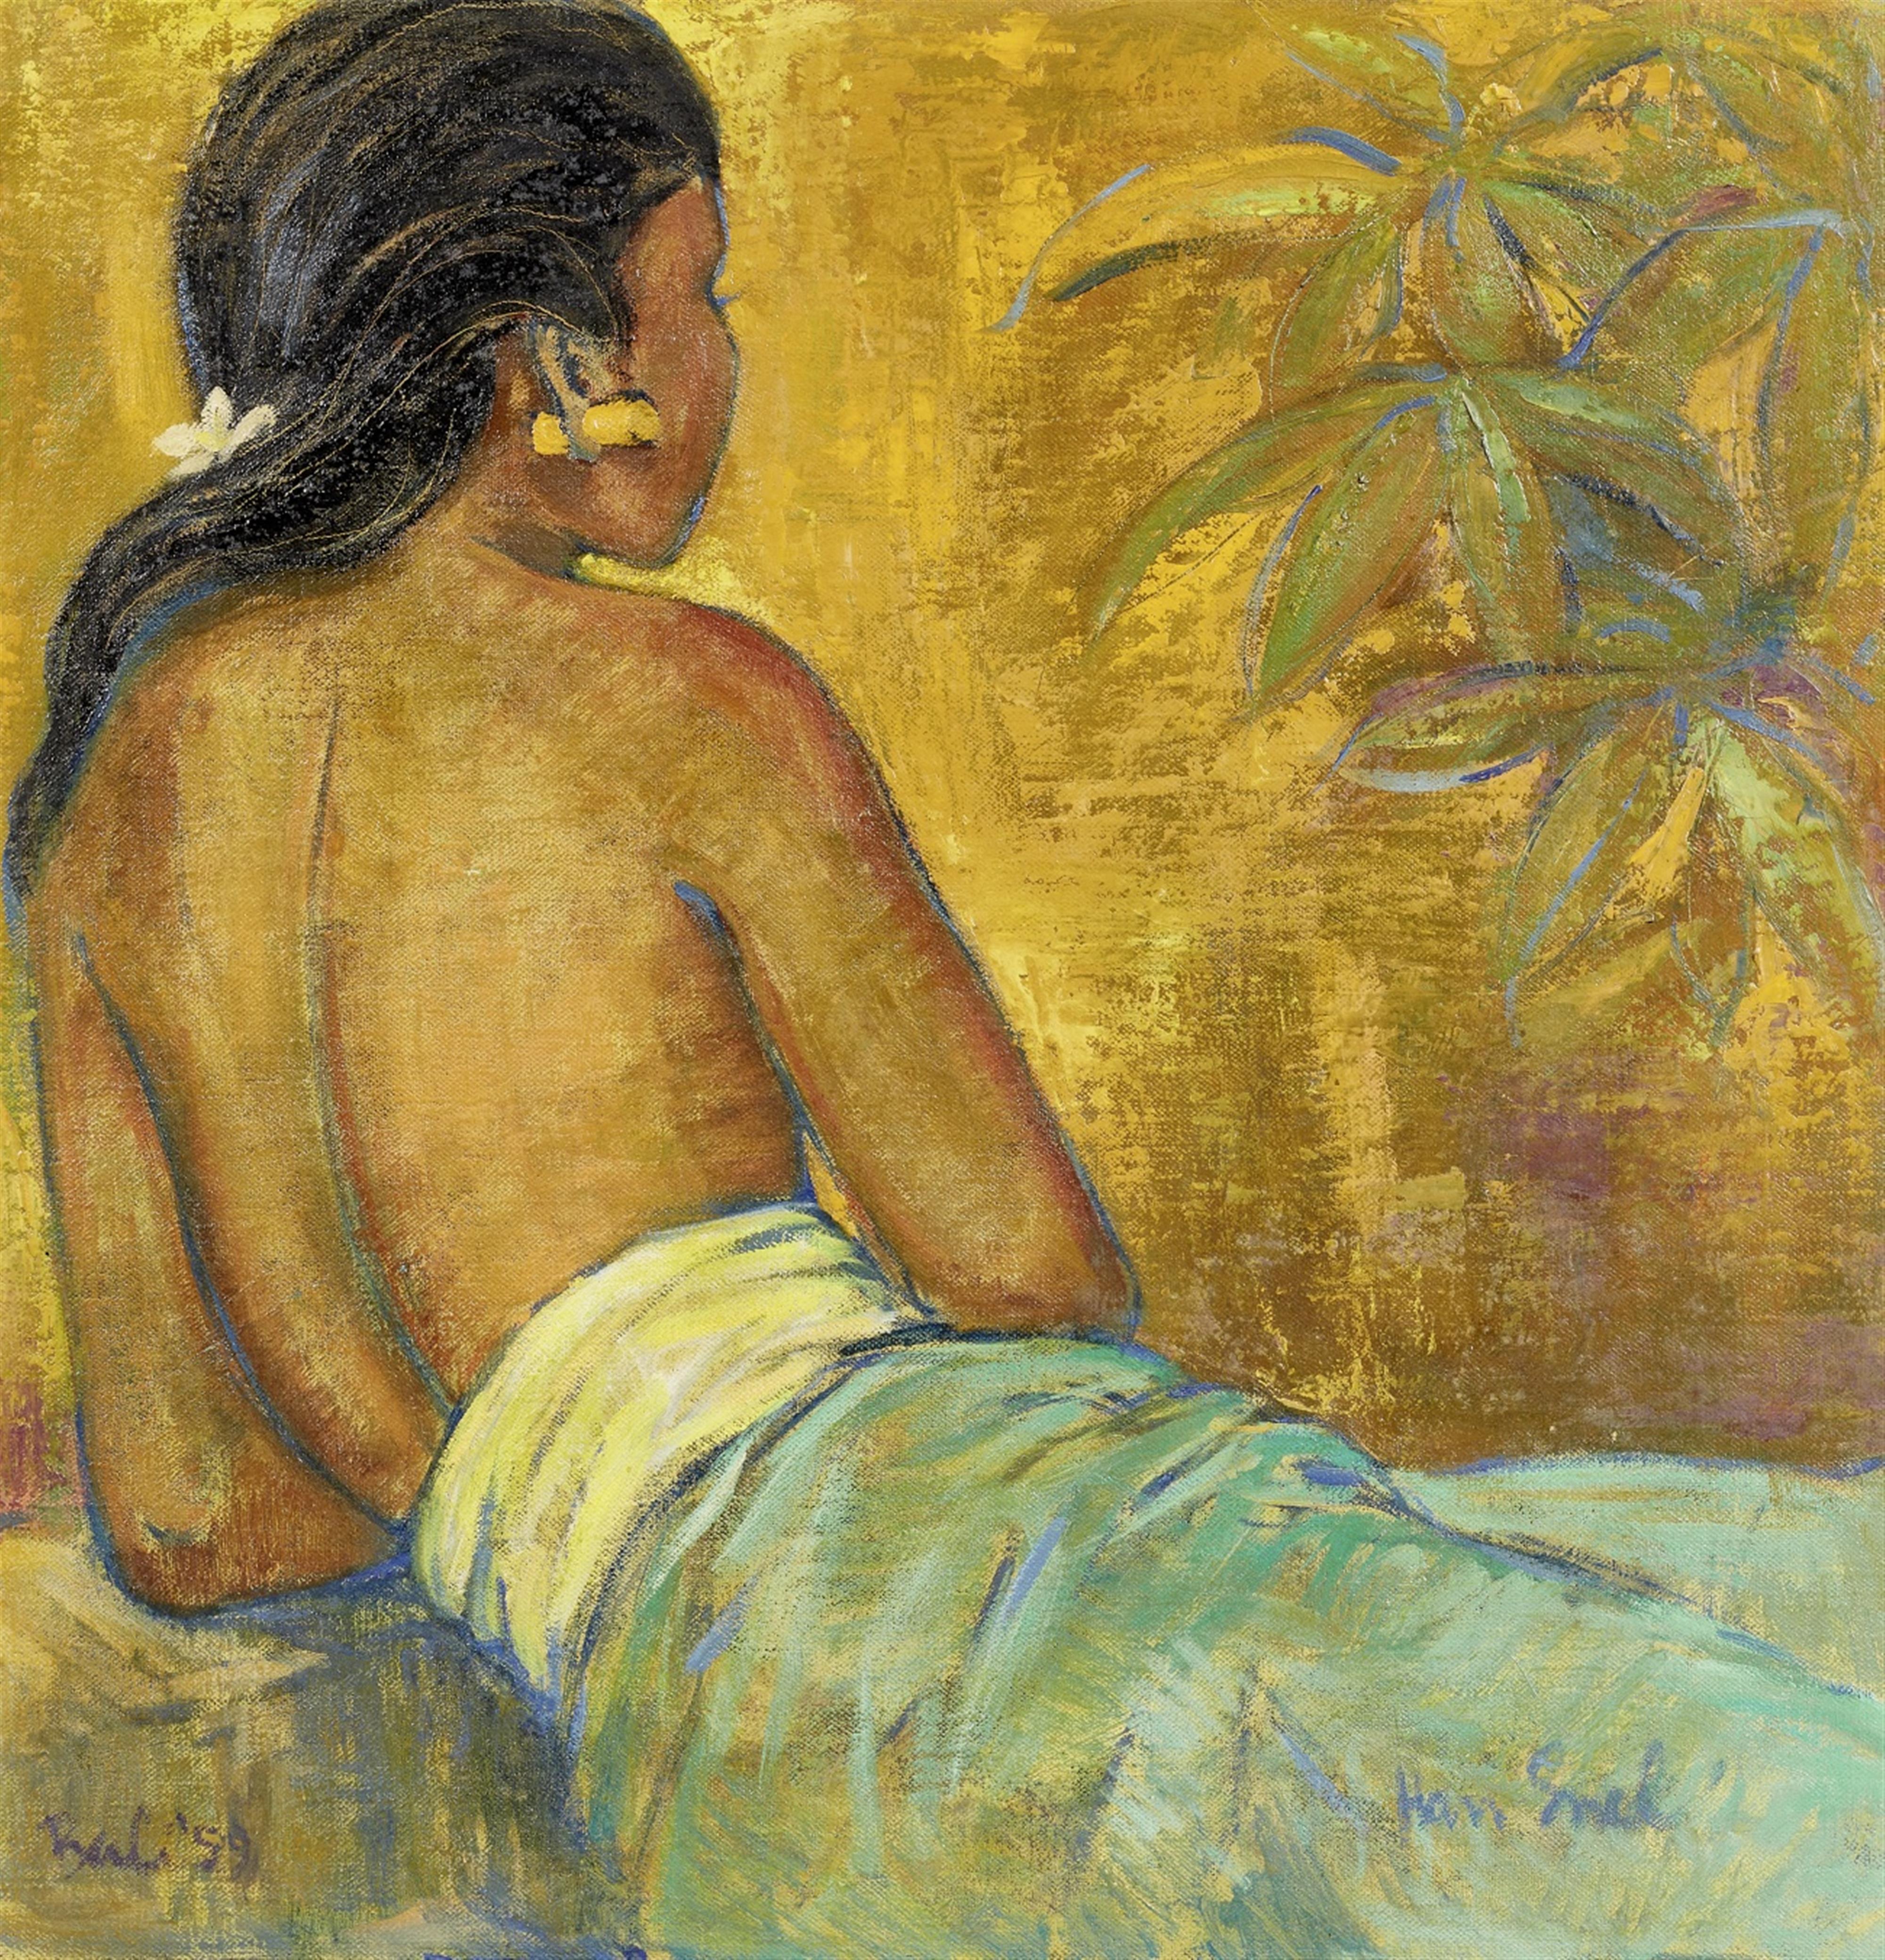 Han Snel . 1959 - Female semi nude. Oil on canvas. Signed Han Snel and dated Bali '59. Original wood frame. - image-1